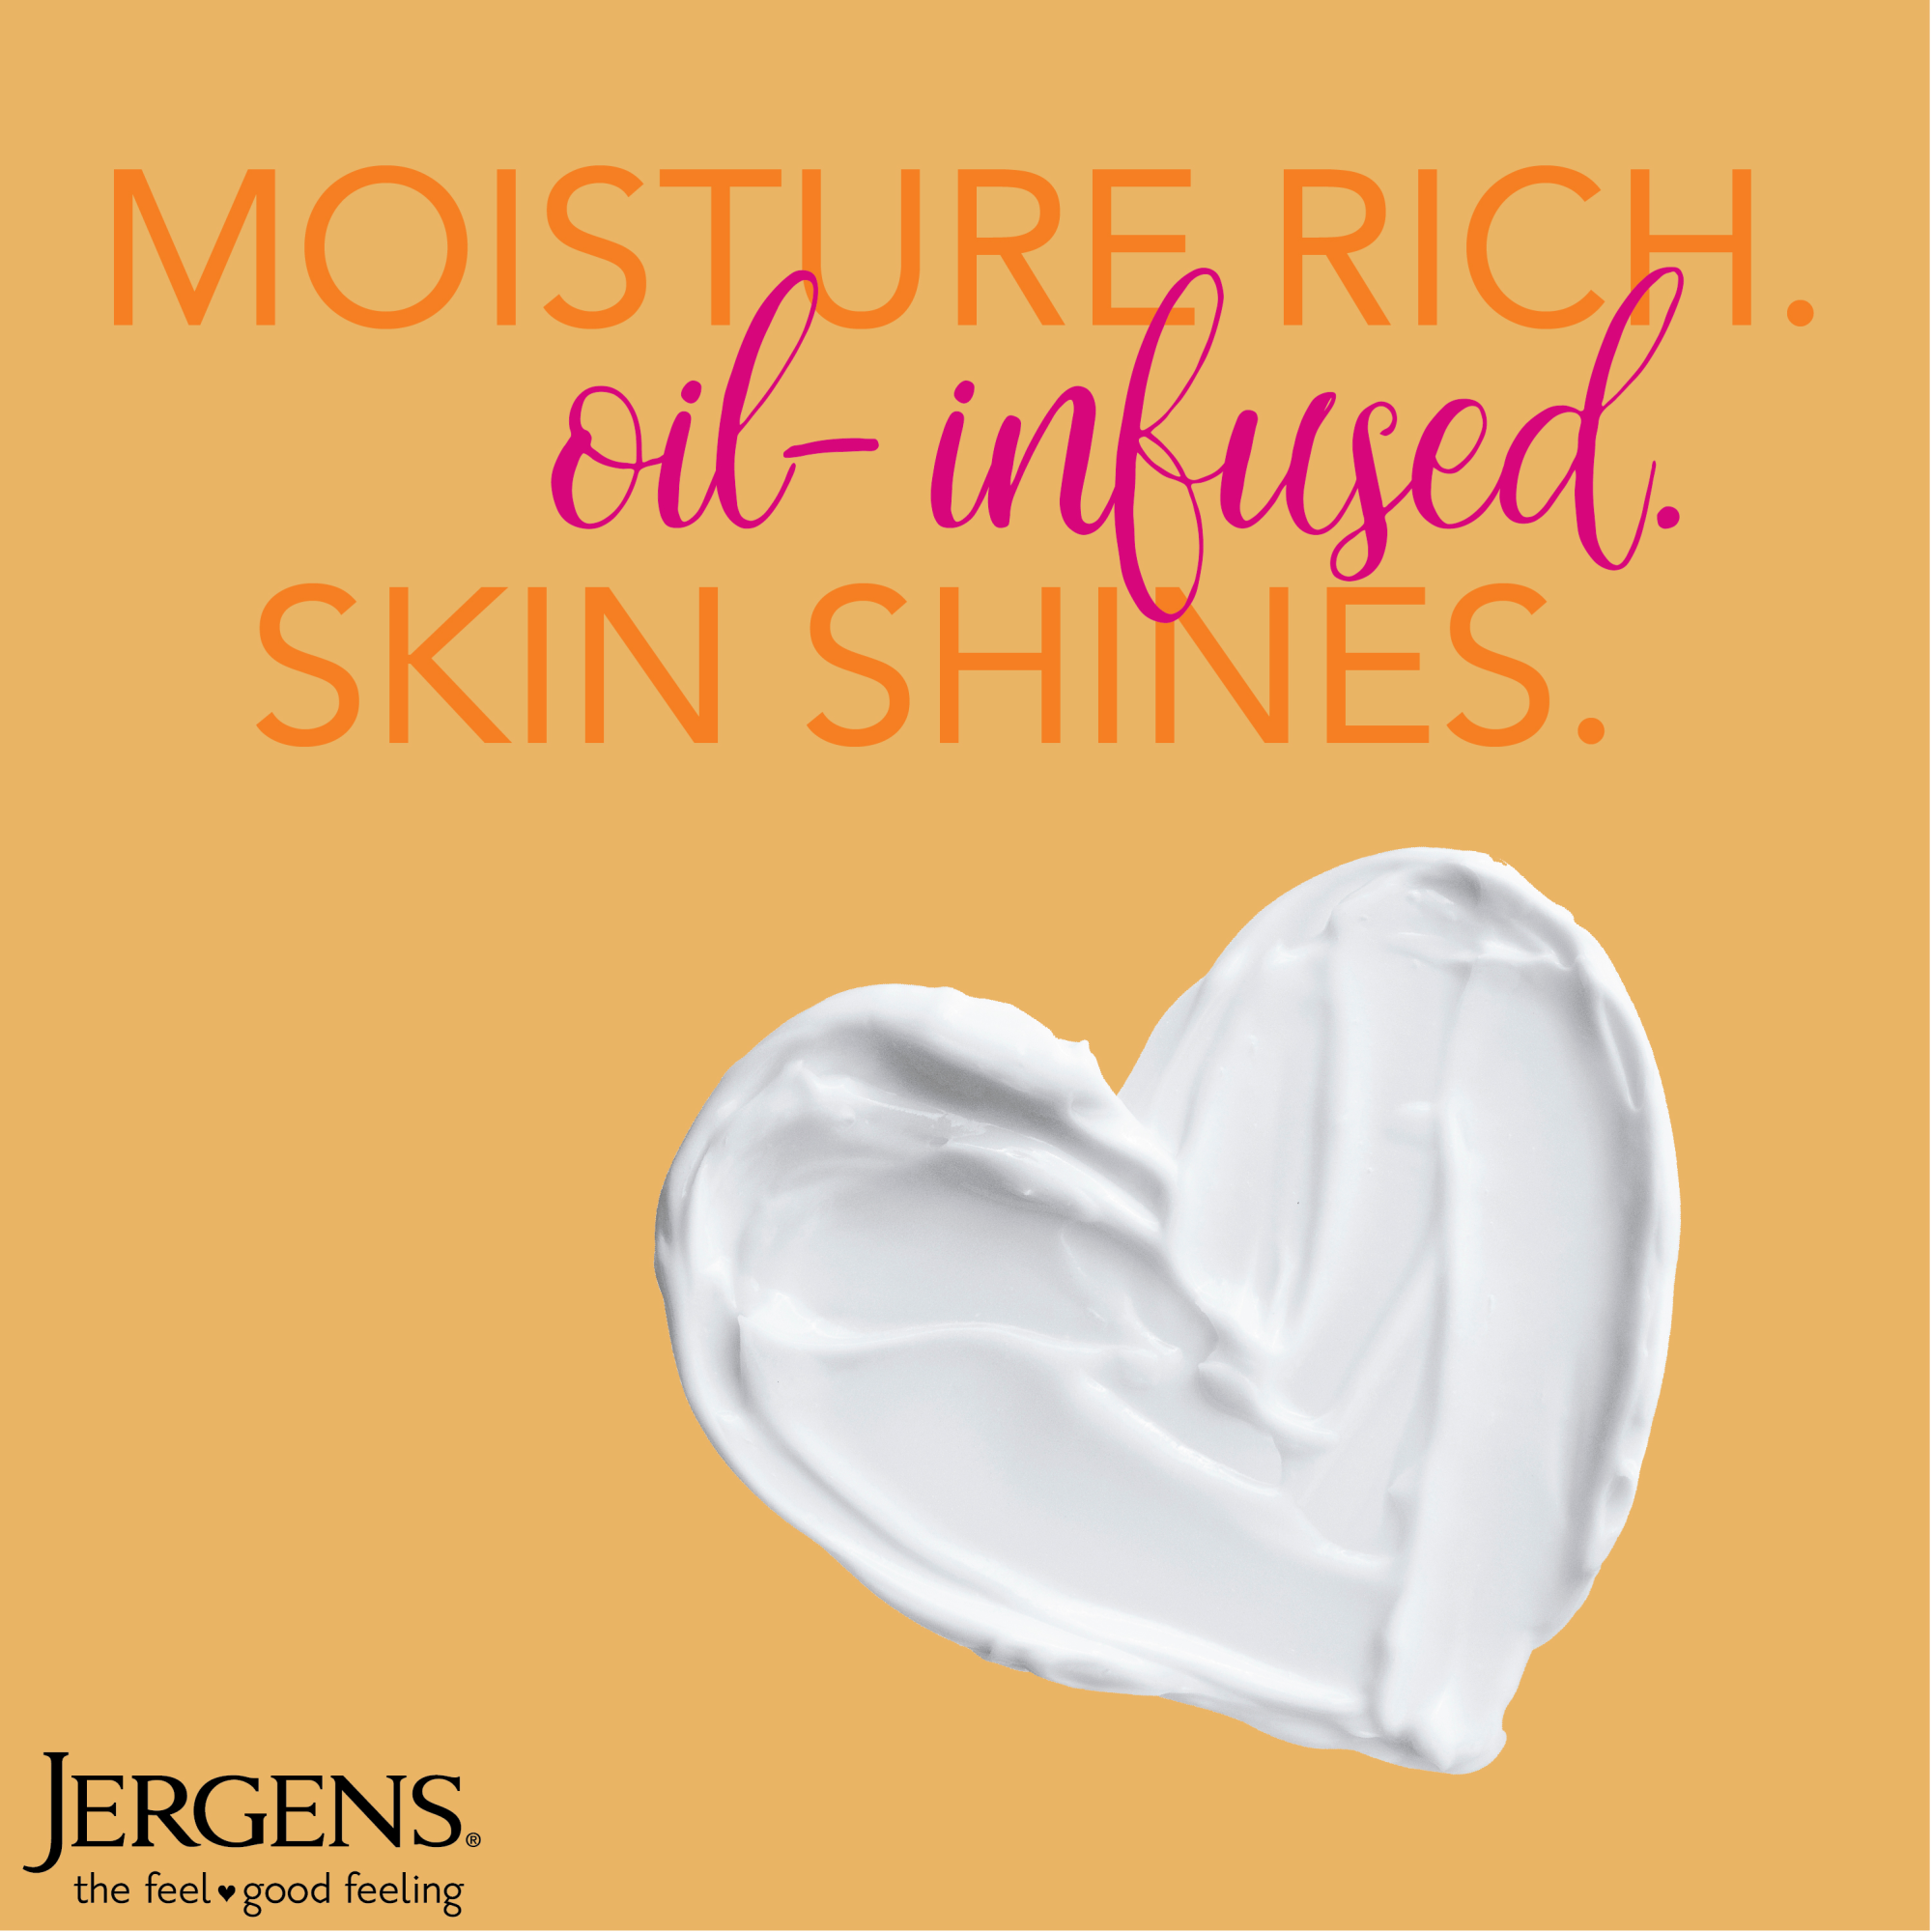 Moisture rich. Oil-infused. Skin Shines.